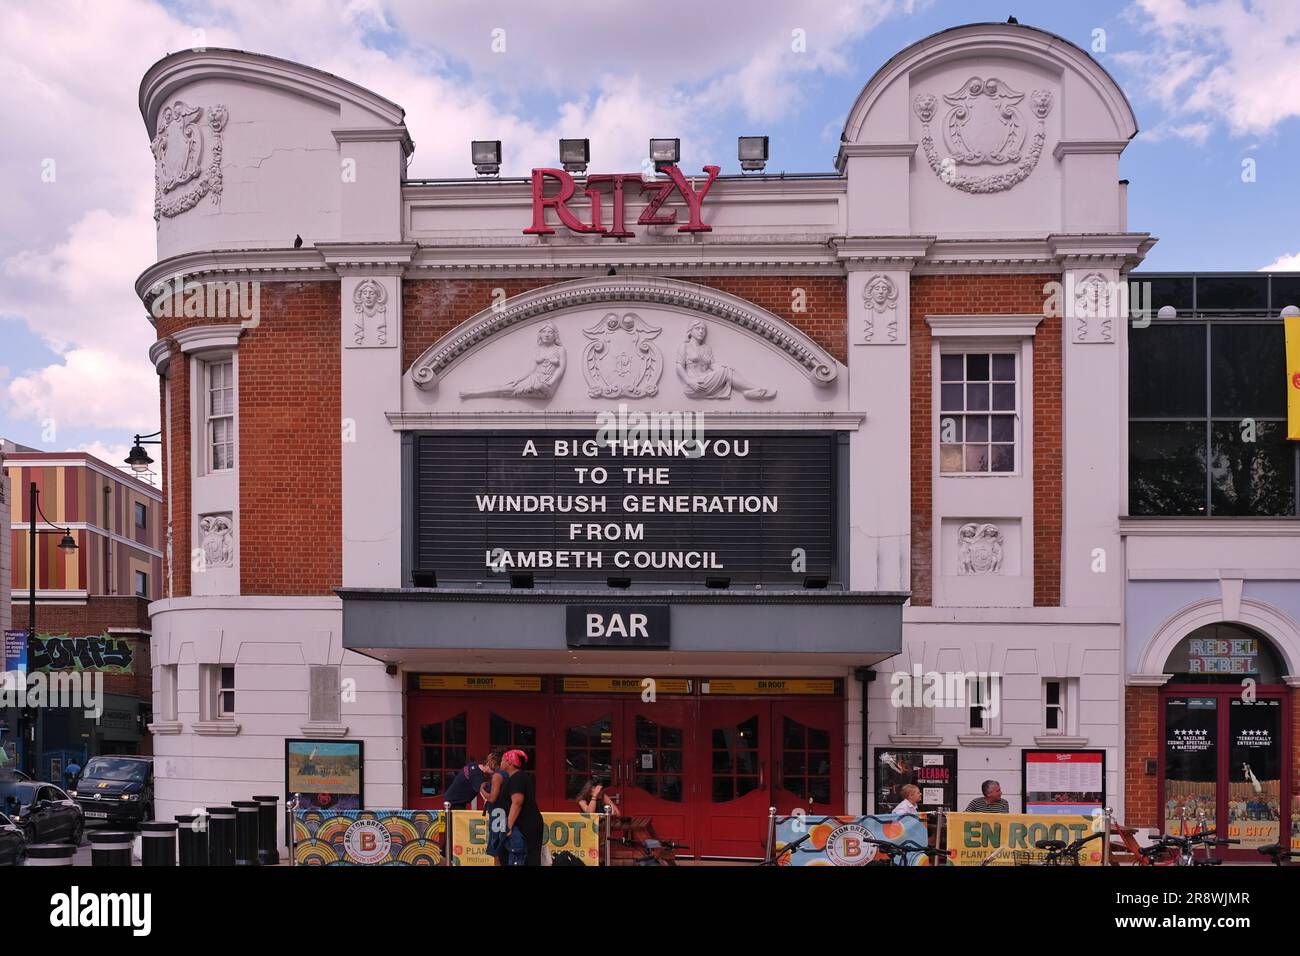 London, UK. The Ritzy Cinema displays a message from Lambeth Council ahead of the 75th anniversary of the HMT Windrush arrivals at Tilbury Docks. Stock Photo